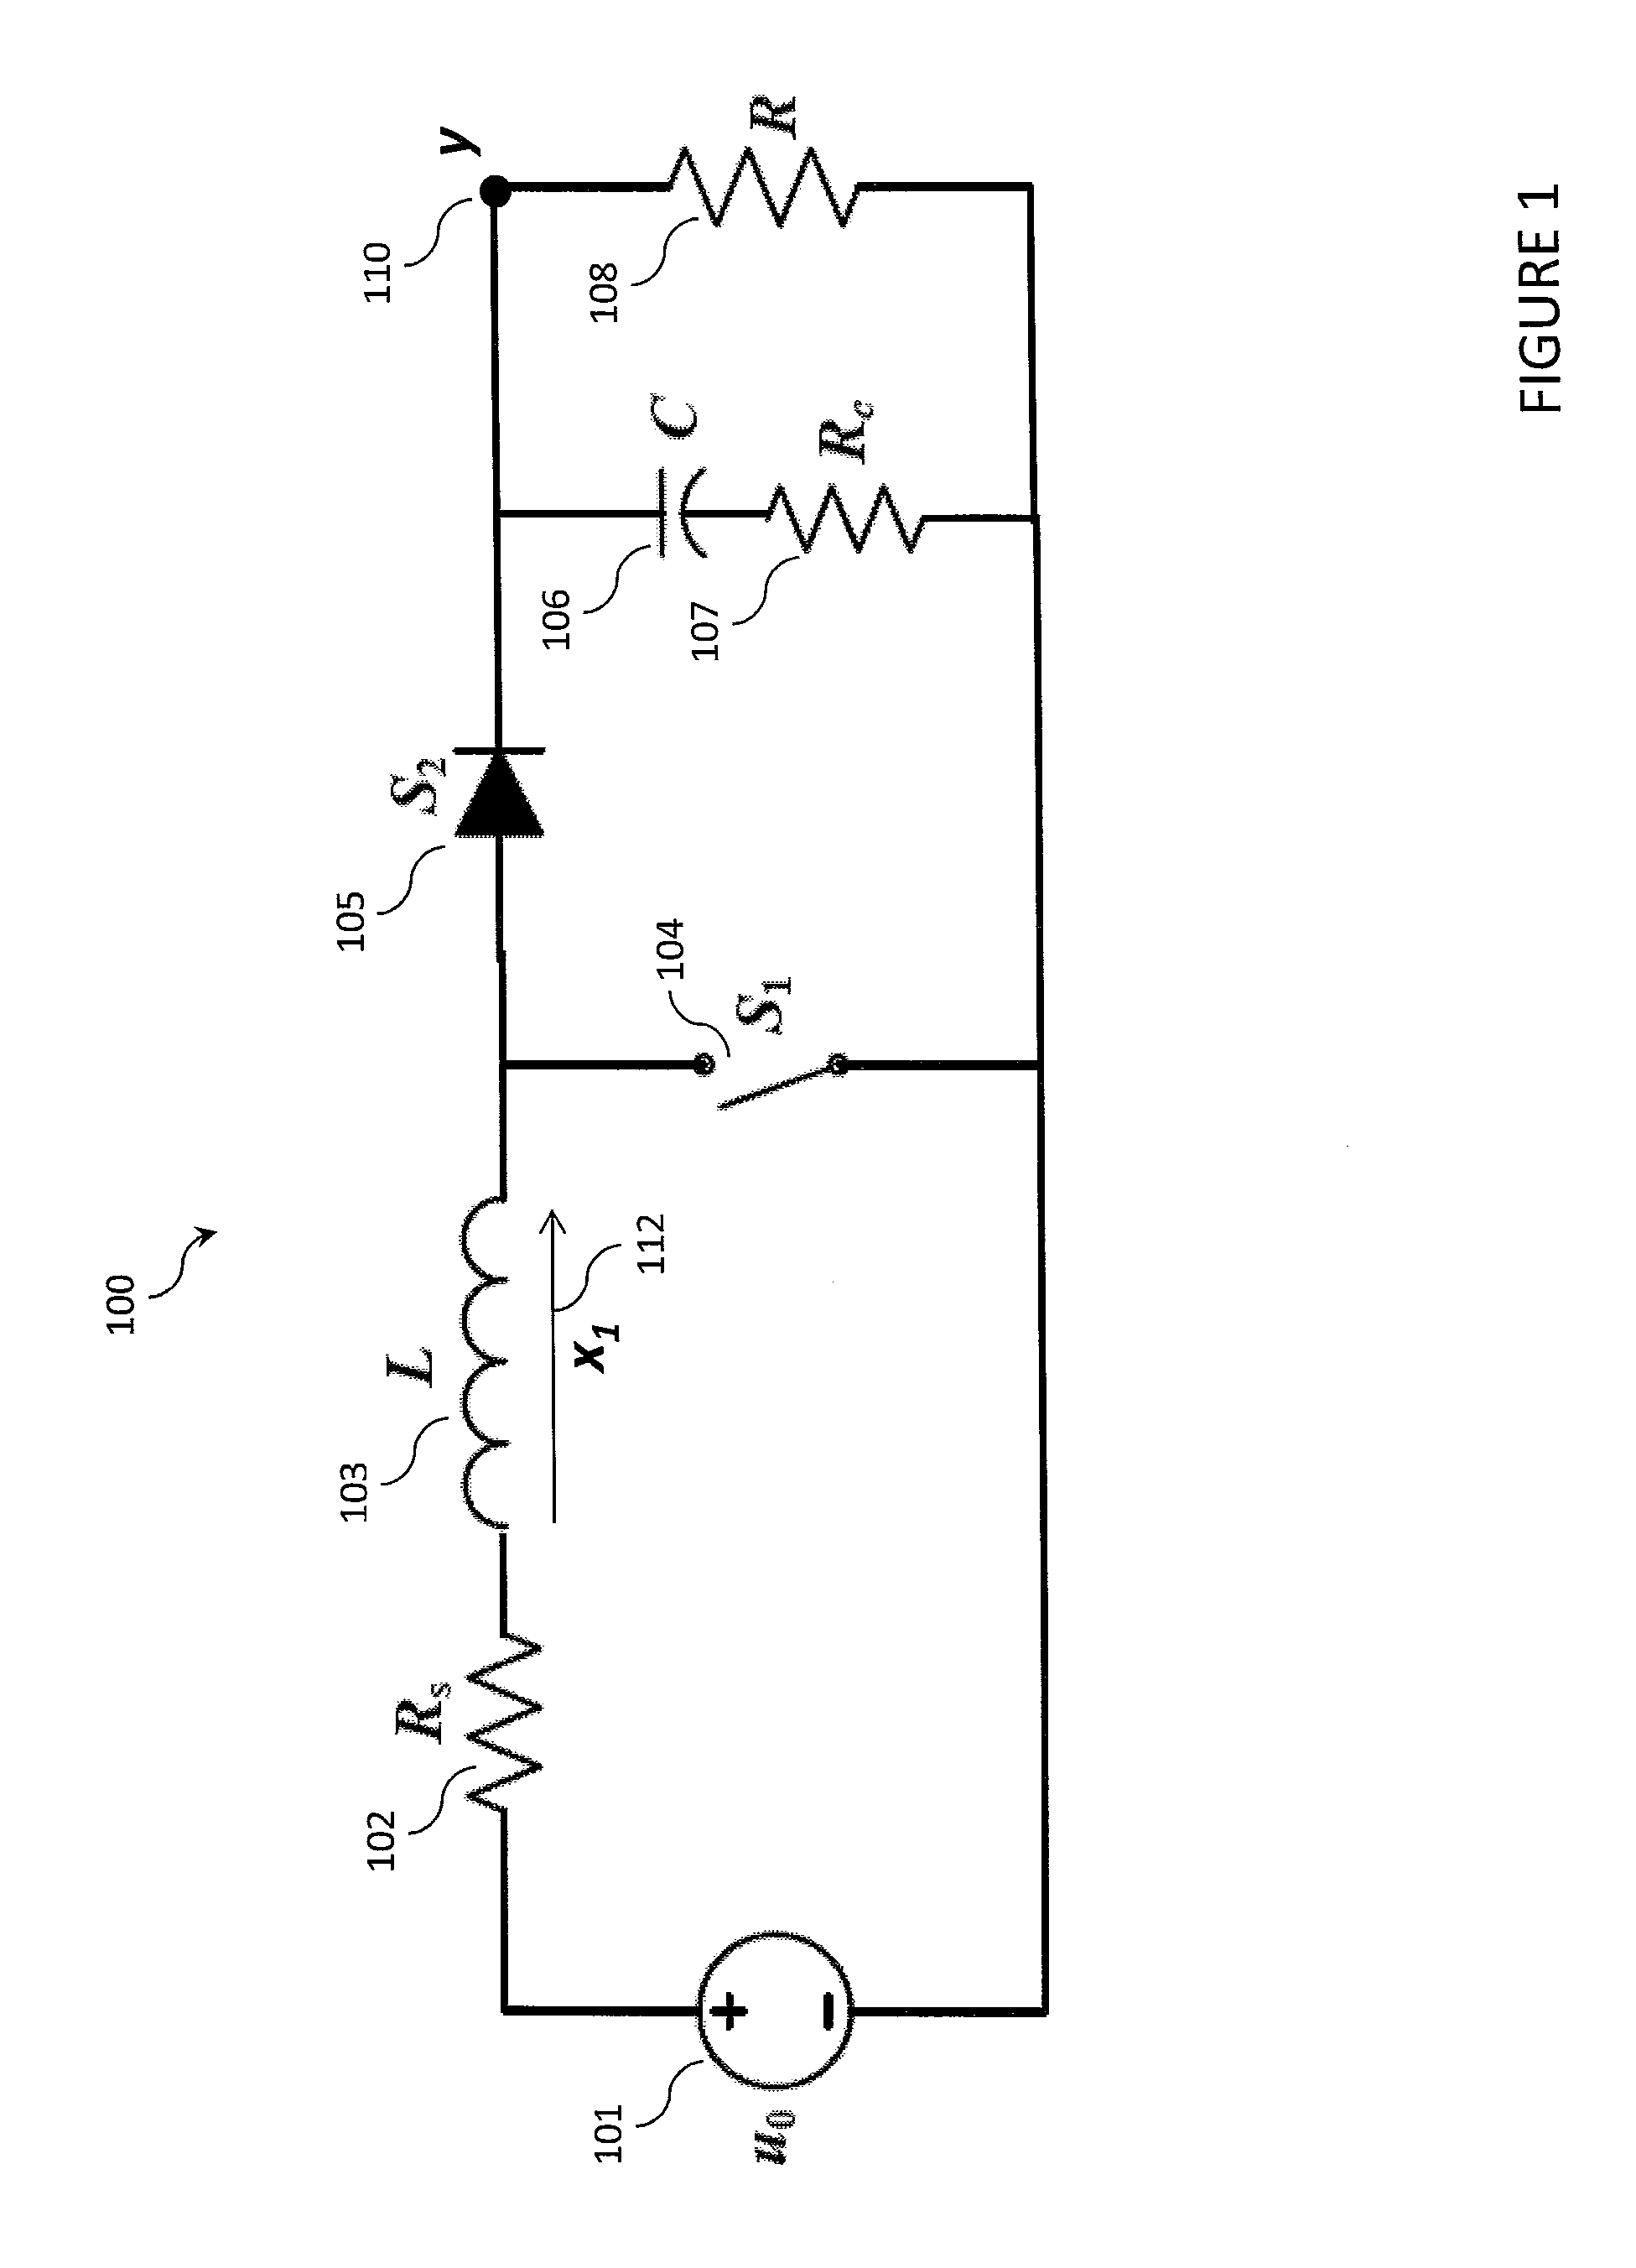 System and method for controlling output ripple of dc-dc converters with leading edge modulation control using current injection